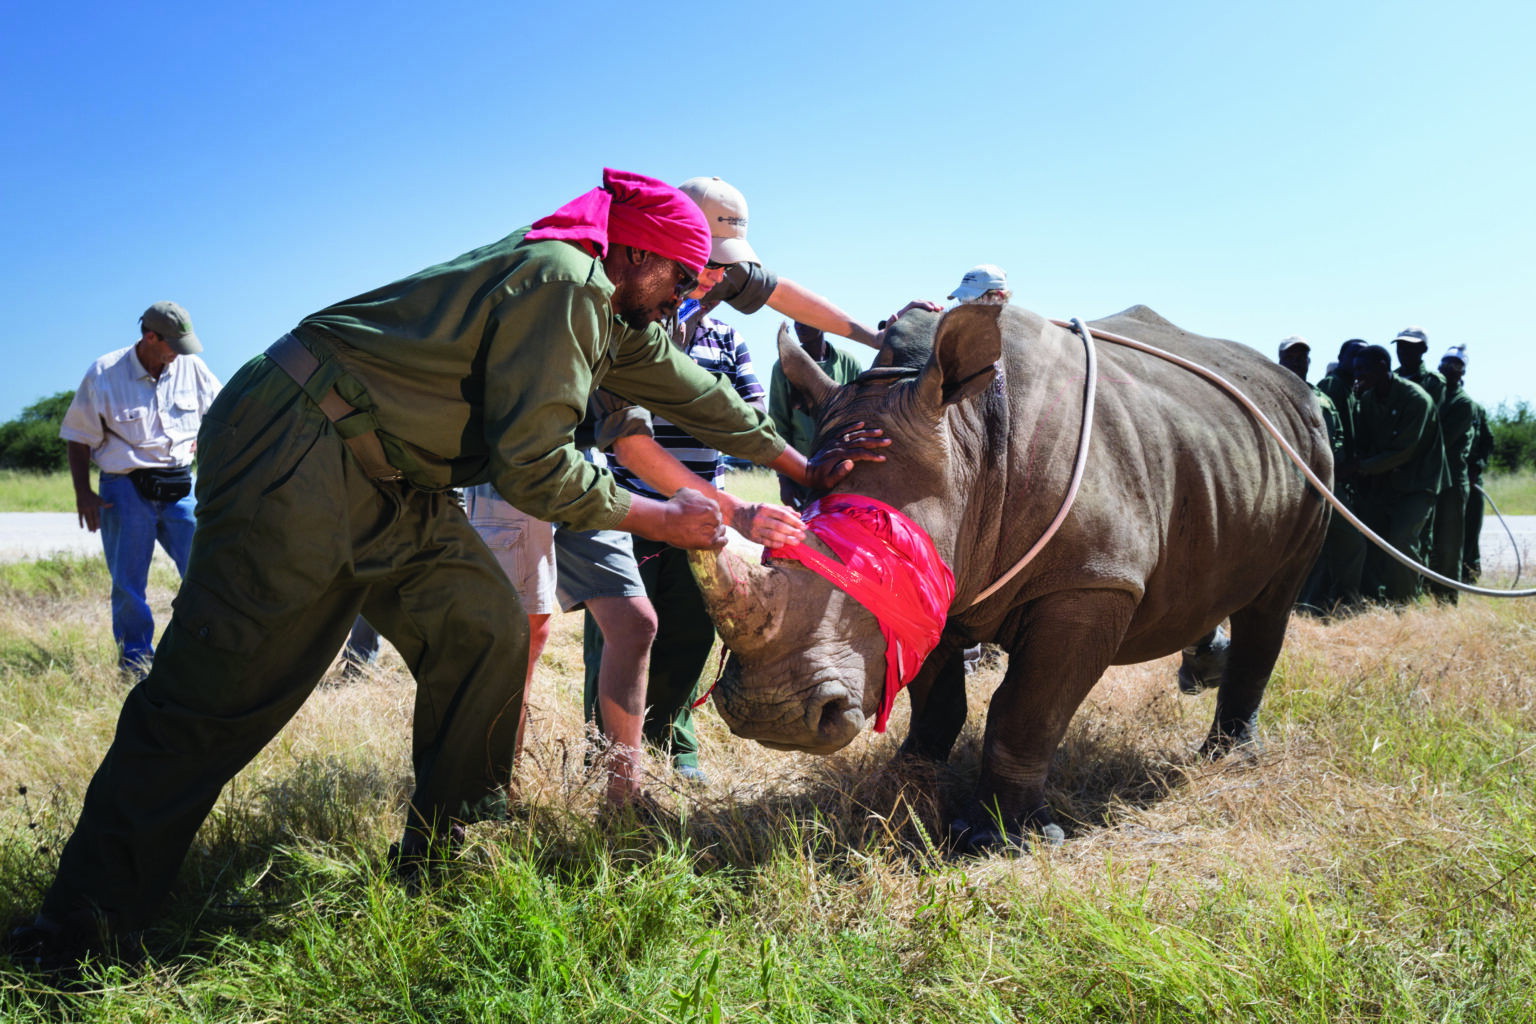 Rhino conservation by Great Plains Foundation